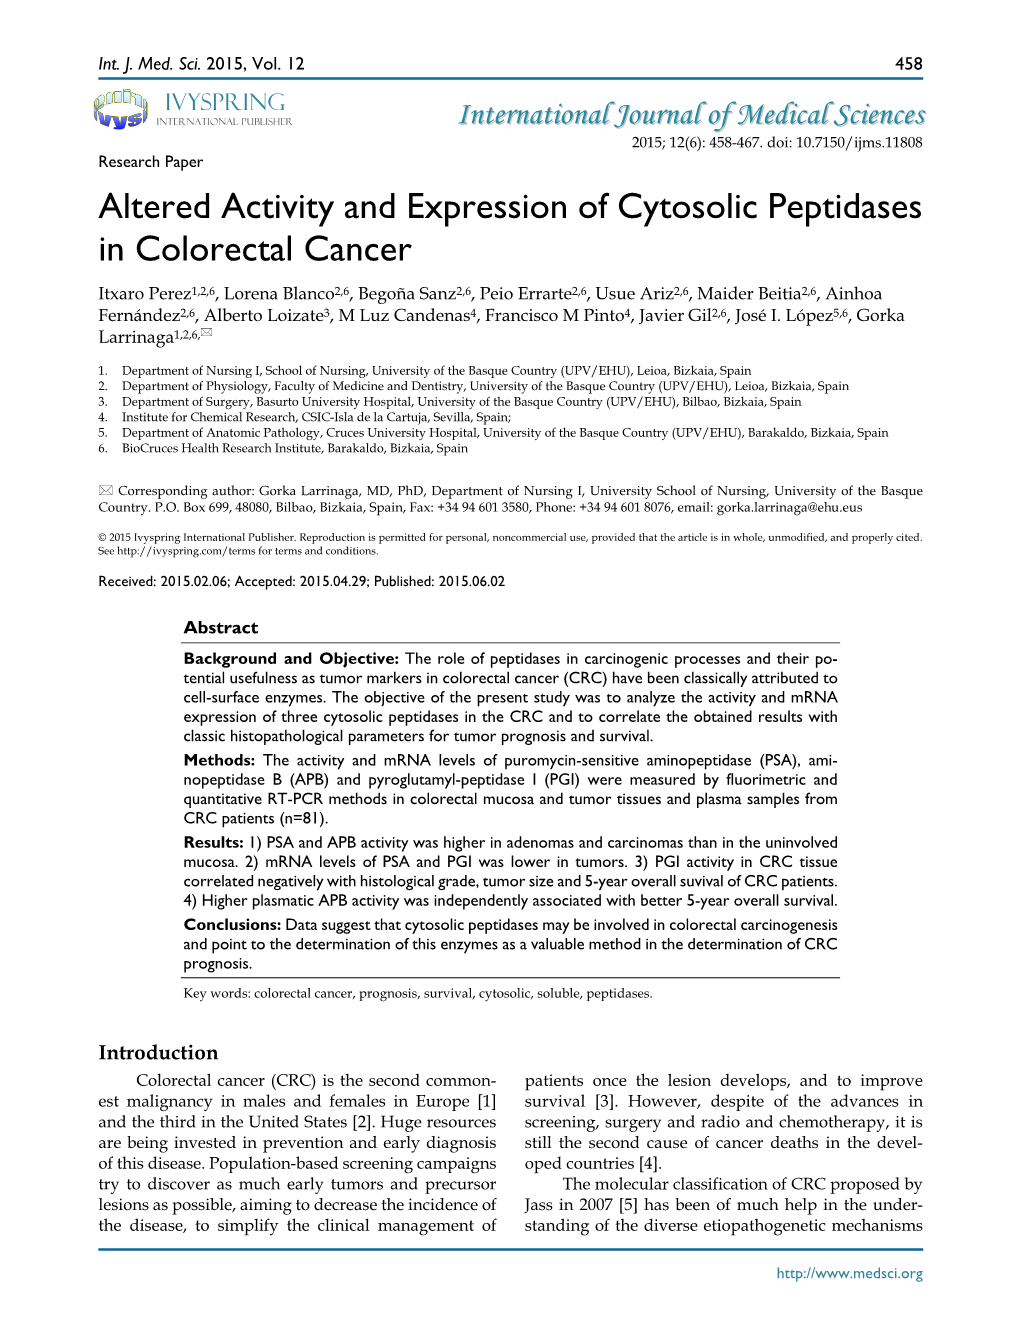 Altered Activity and Expression of Cytosolic Peptidases in Colorectal